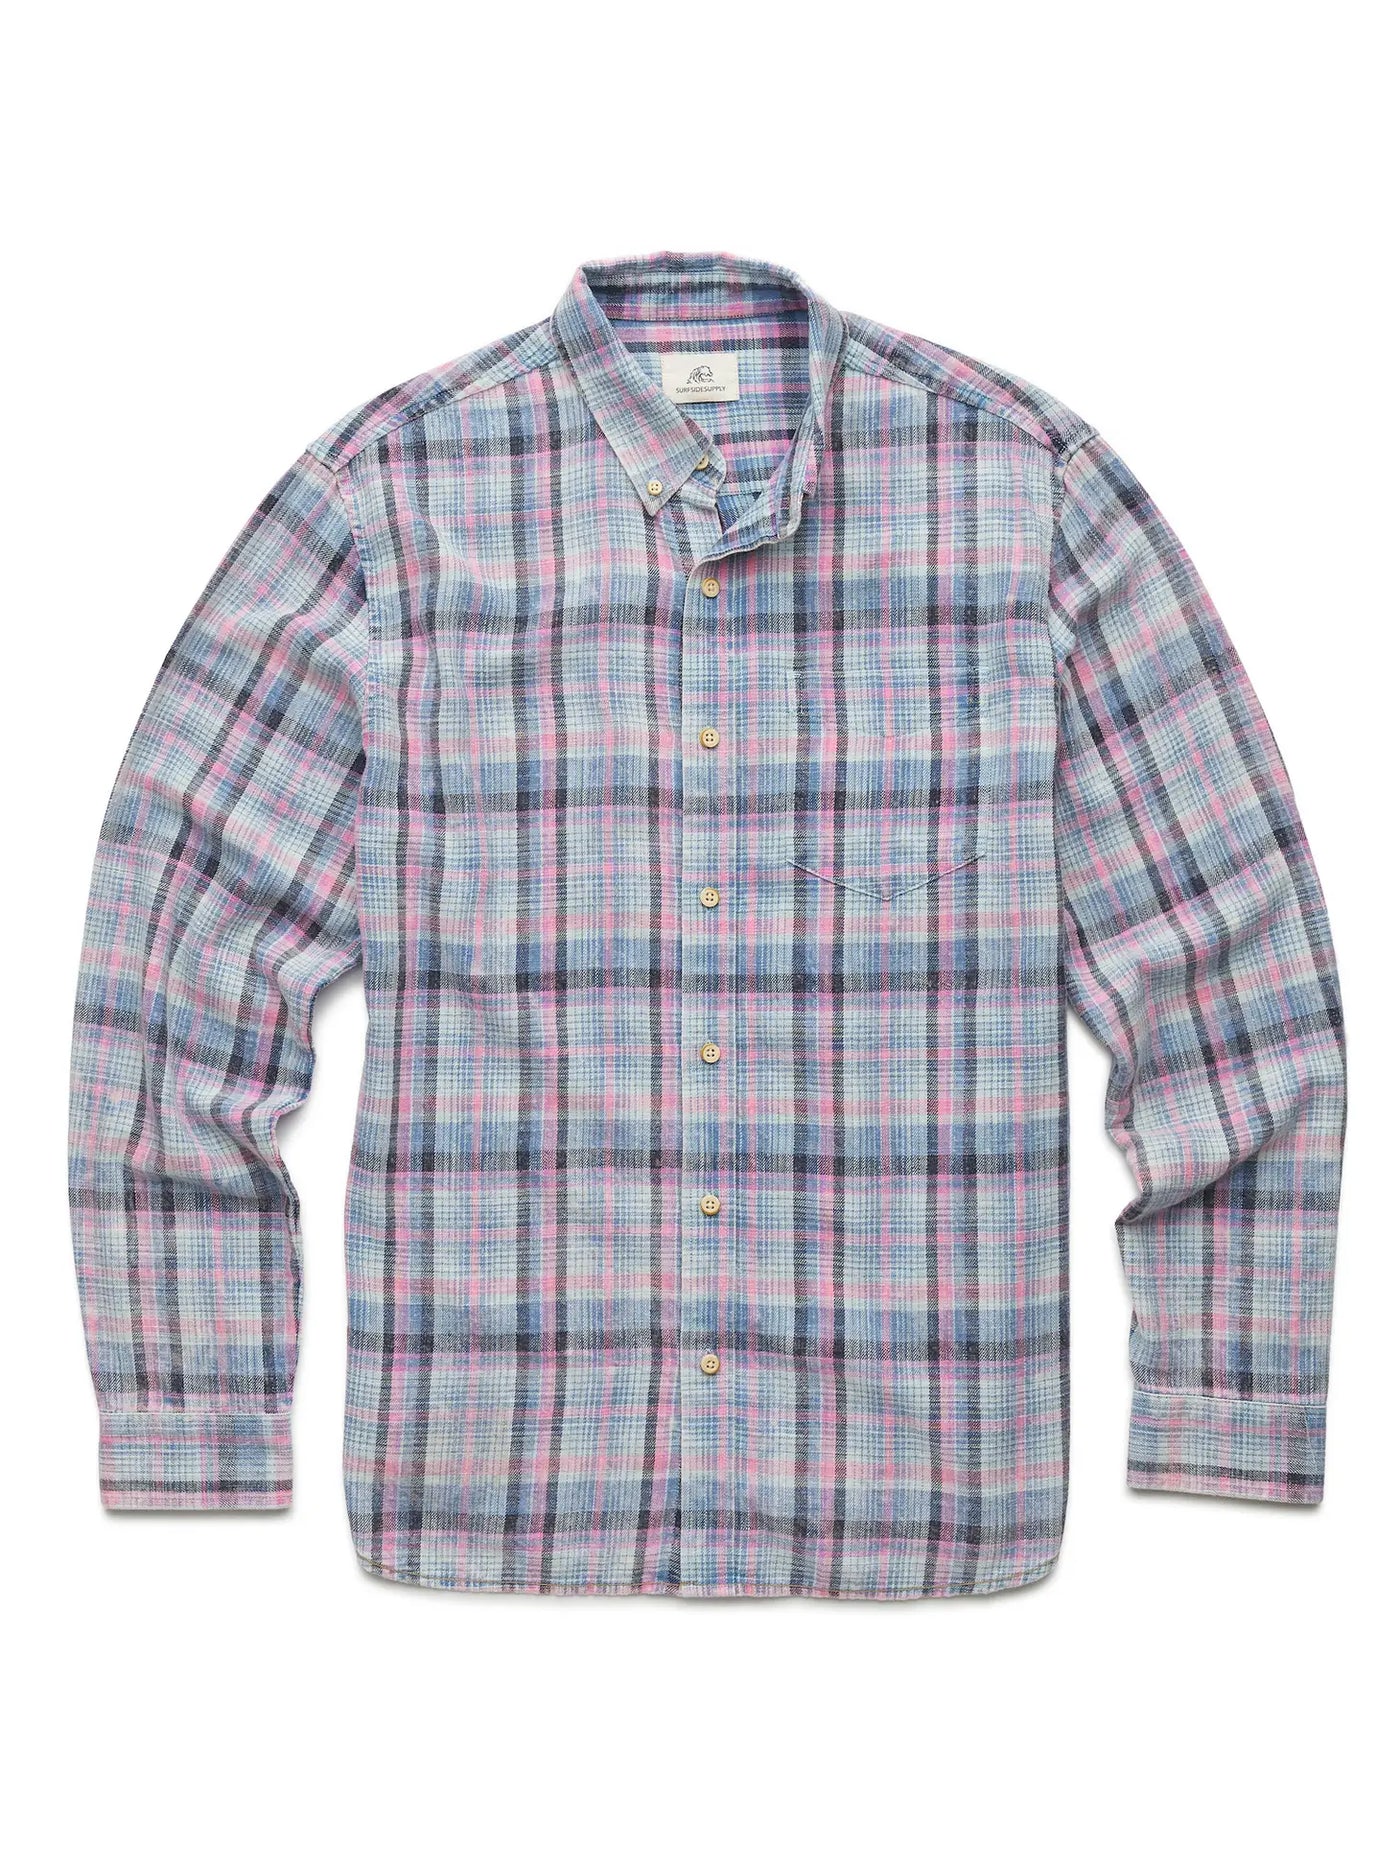 Surfside Supply Co: Brian Washed Plaid Shirt